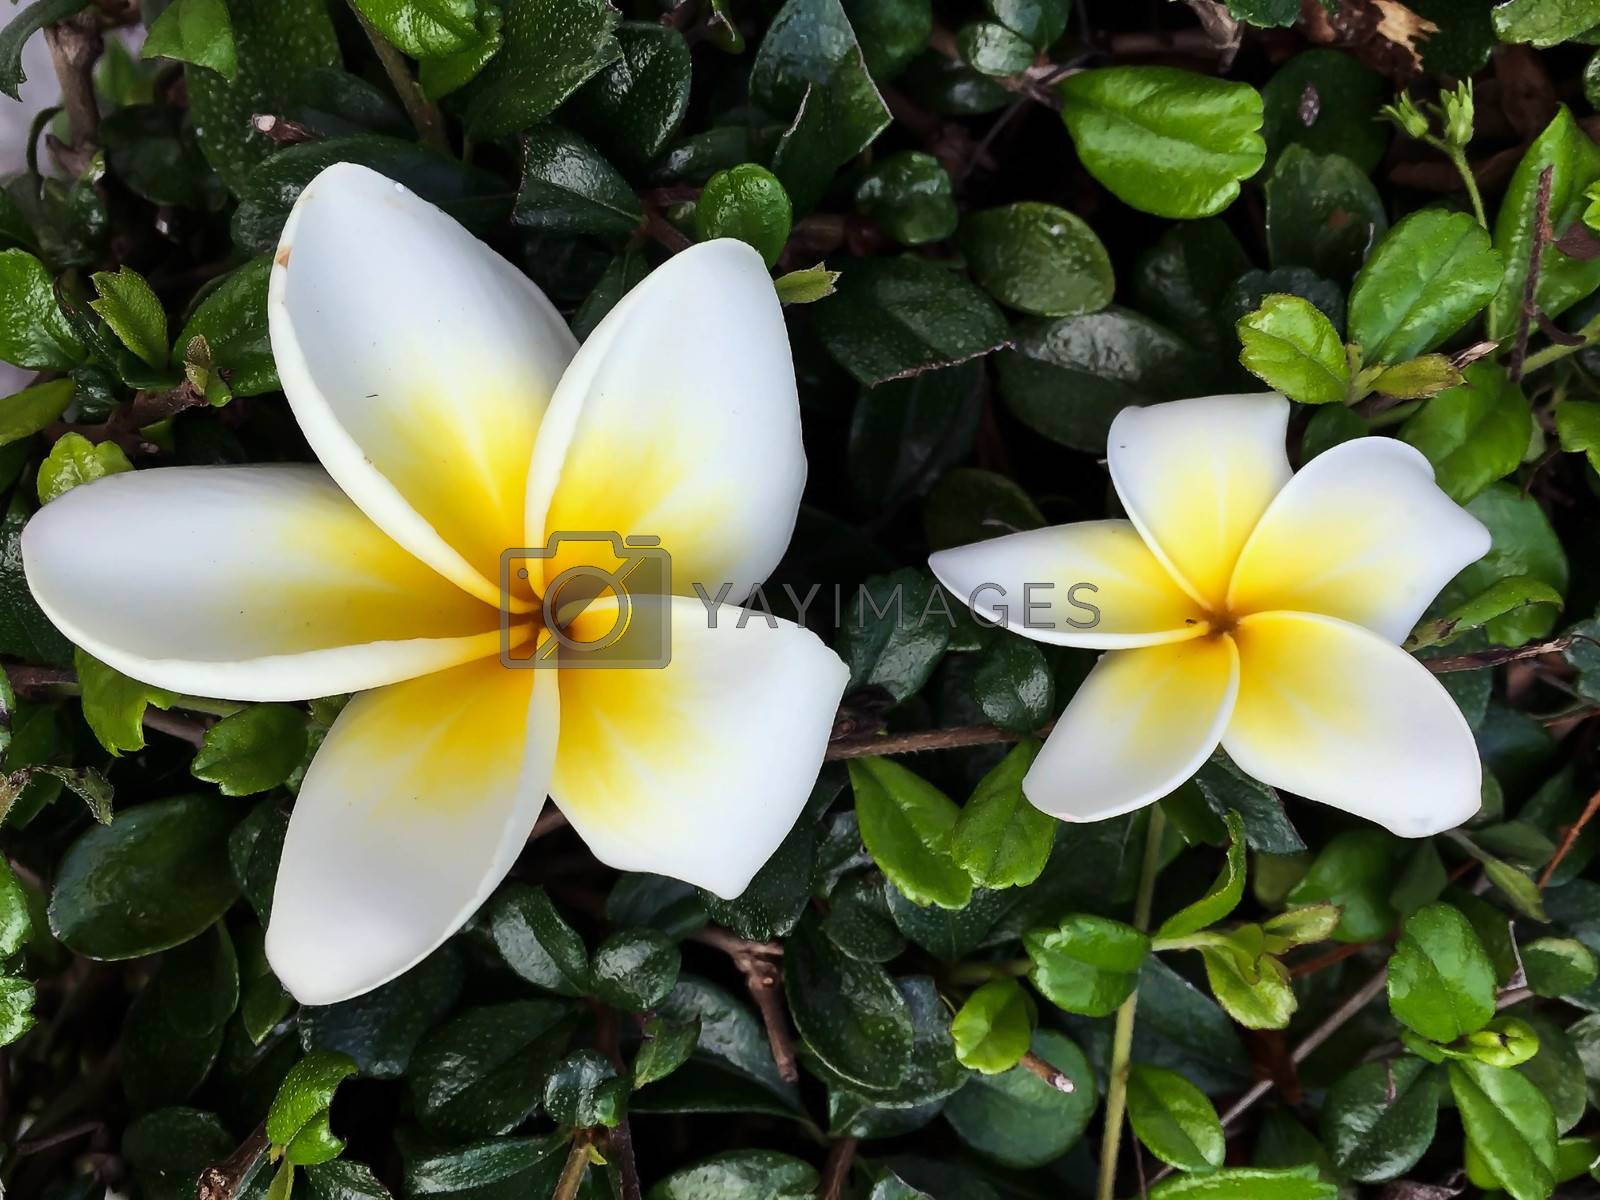 Royalty free image of Closeup white and yellow plumeria flower by STZU